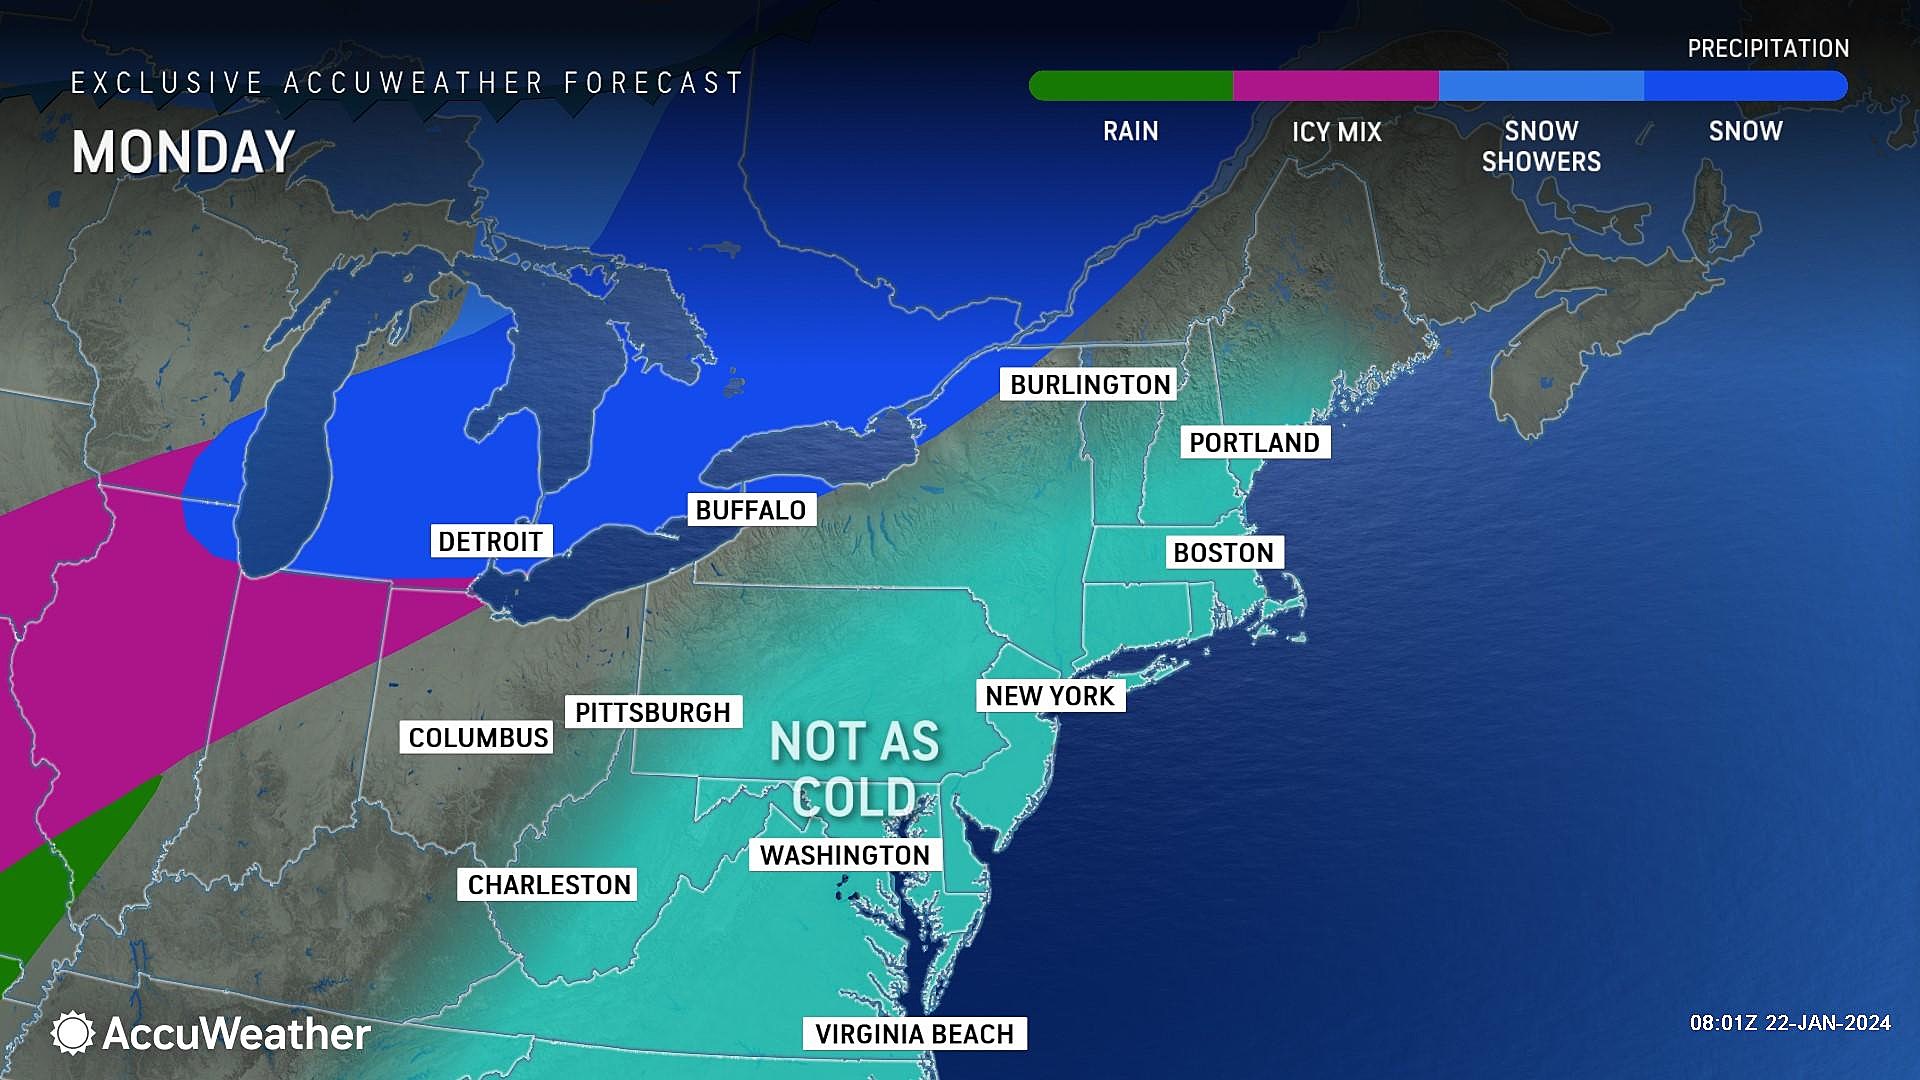 NJ turns warmer and wetter: Any new icing or flooding concerns?